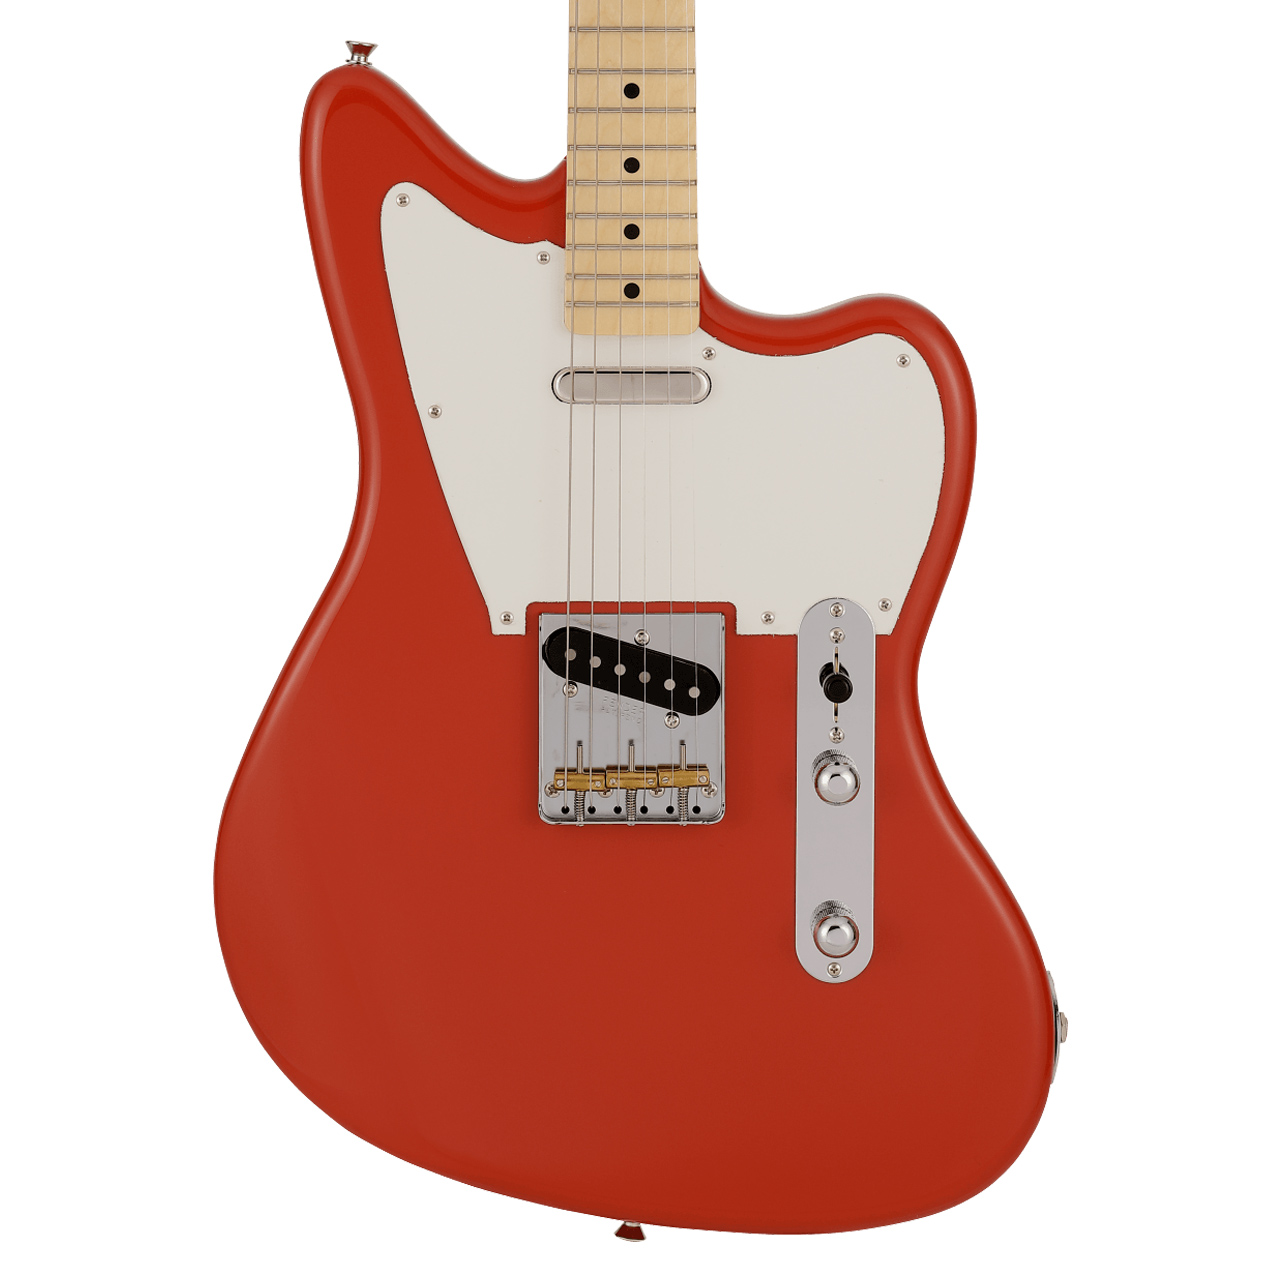 Fender Made in Japan Offset Telecaster MN Fiesta Red | MUSIC STORE  professional